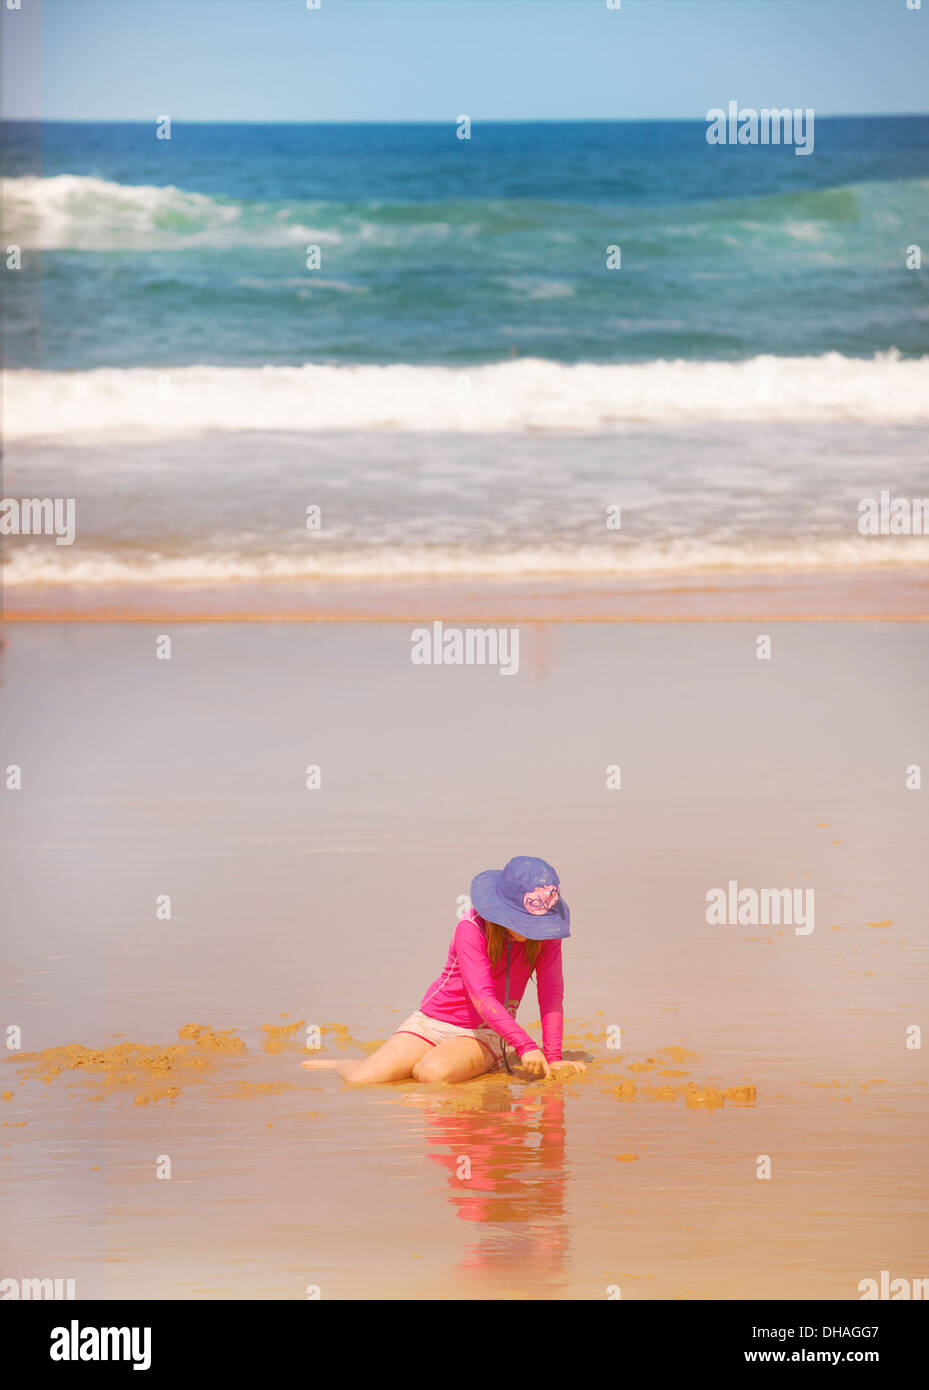 A young child age 5 playing on a beach in Queensland, Australia. Stock Photo